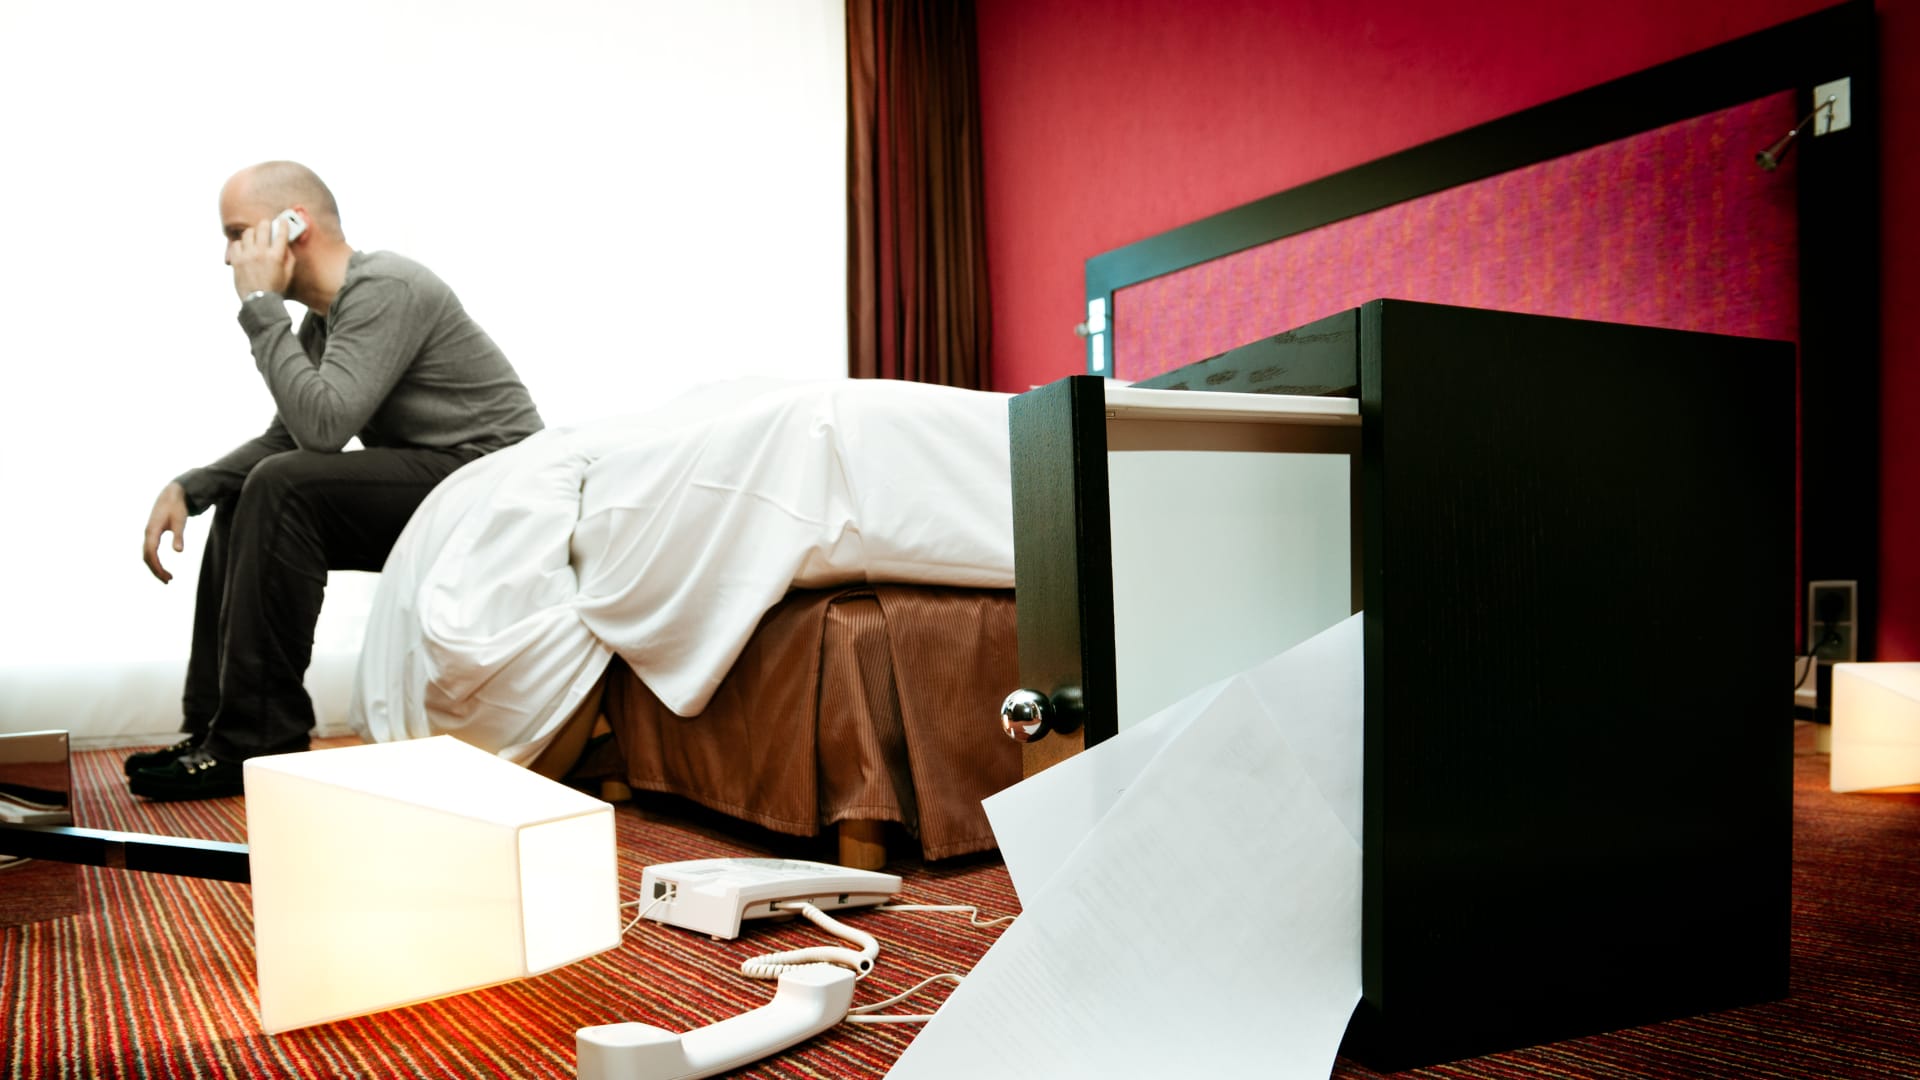 What are the most common crimes in hotels? Not theft, say UK police